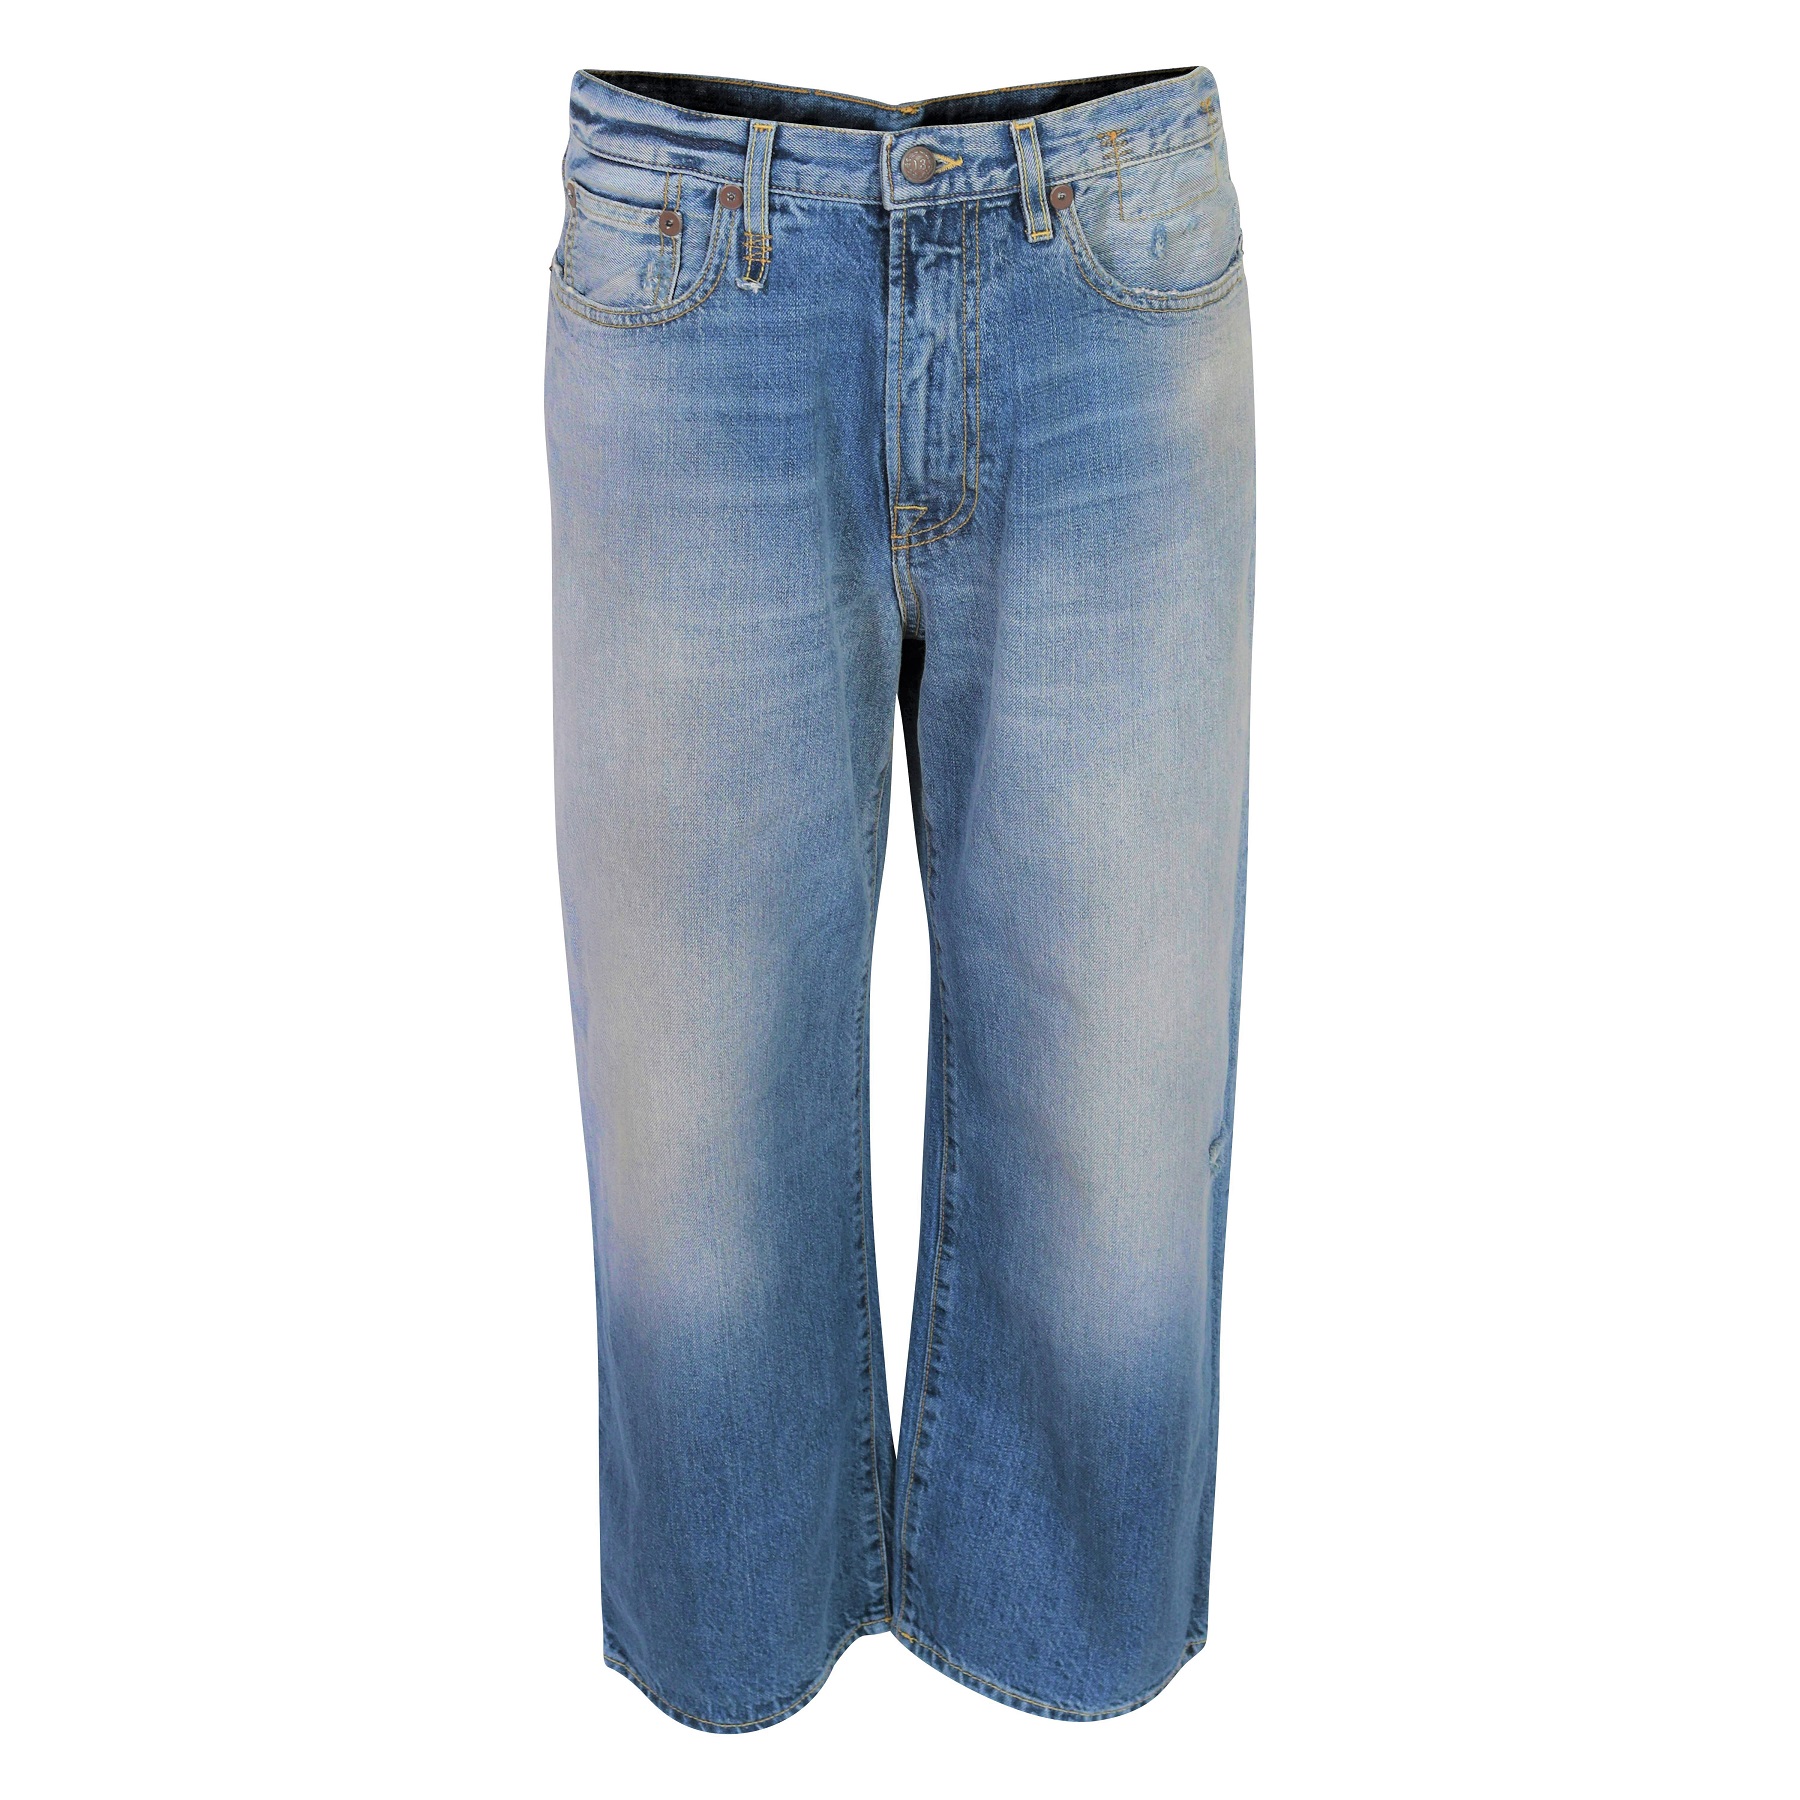 R13 Ankled D'Arcy Jeans in Irving Blue 26